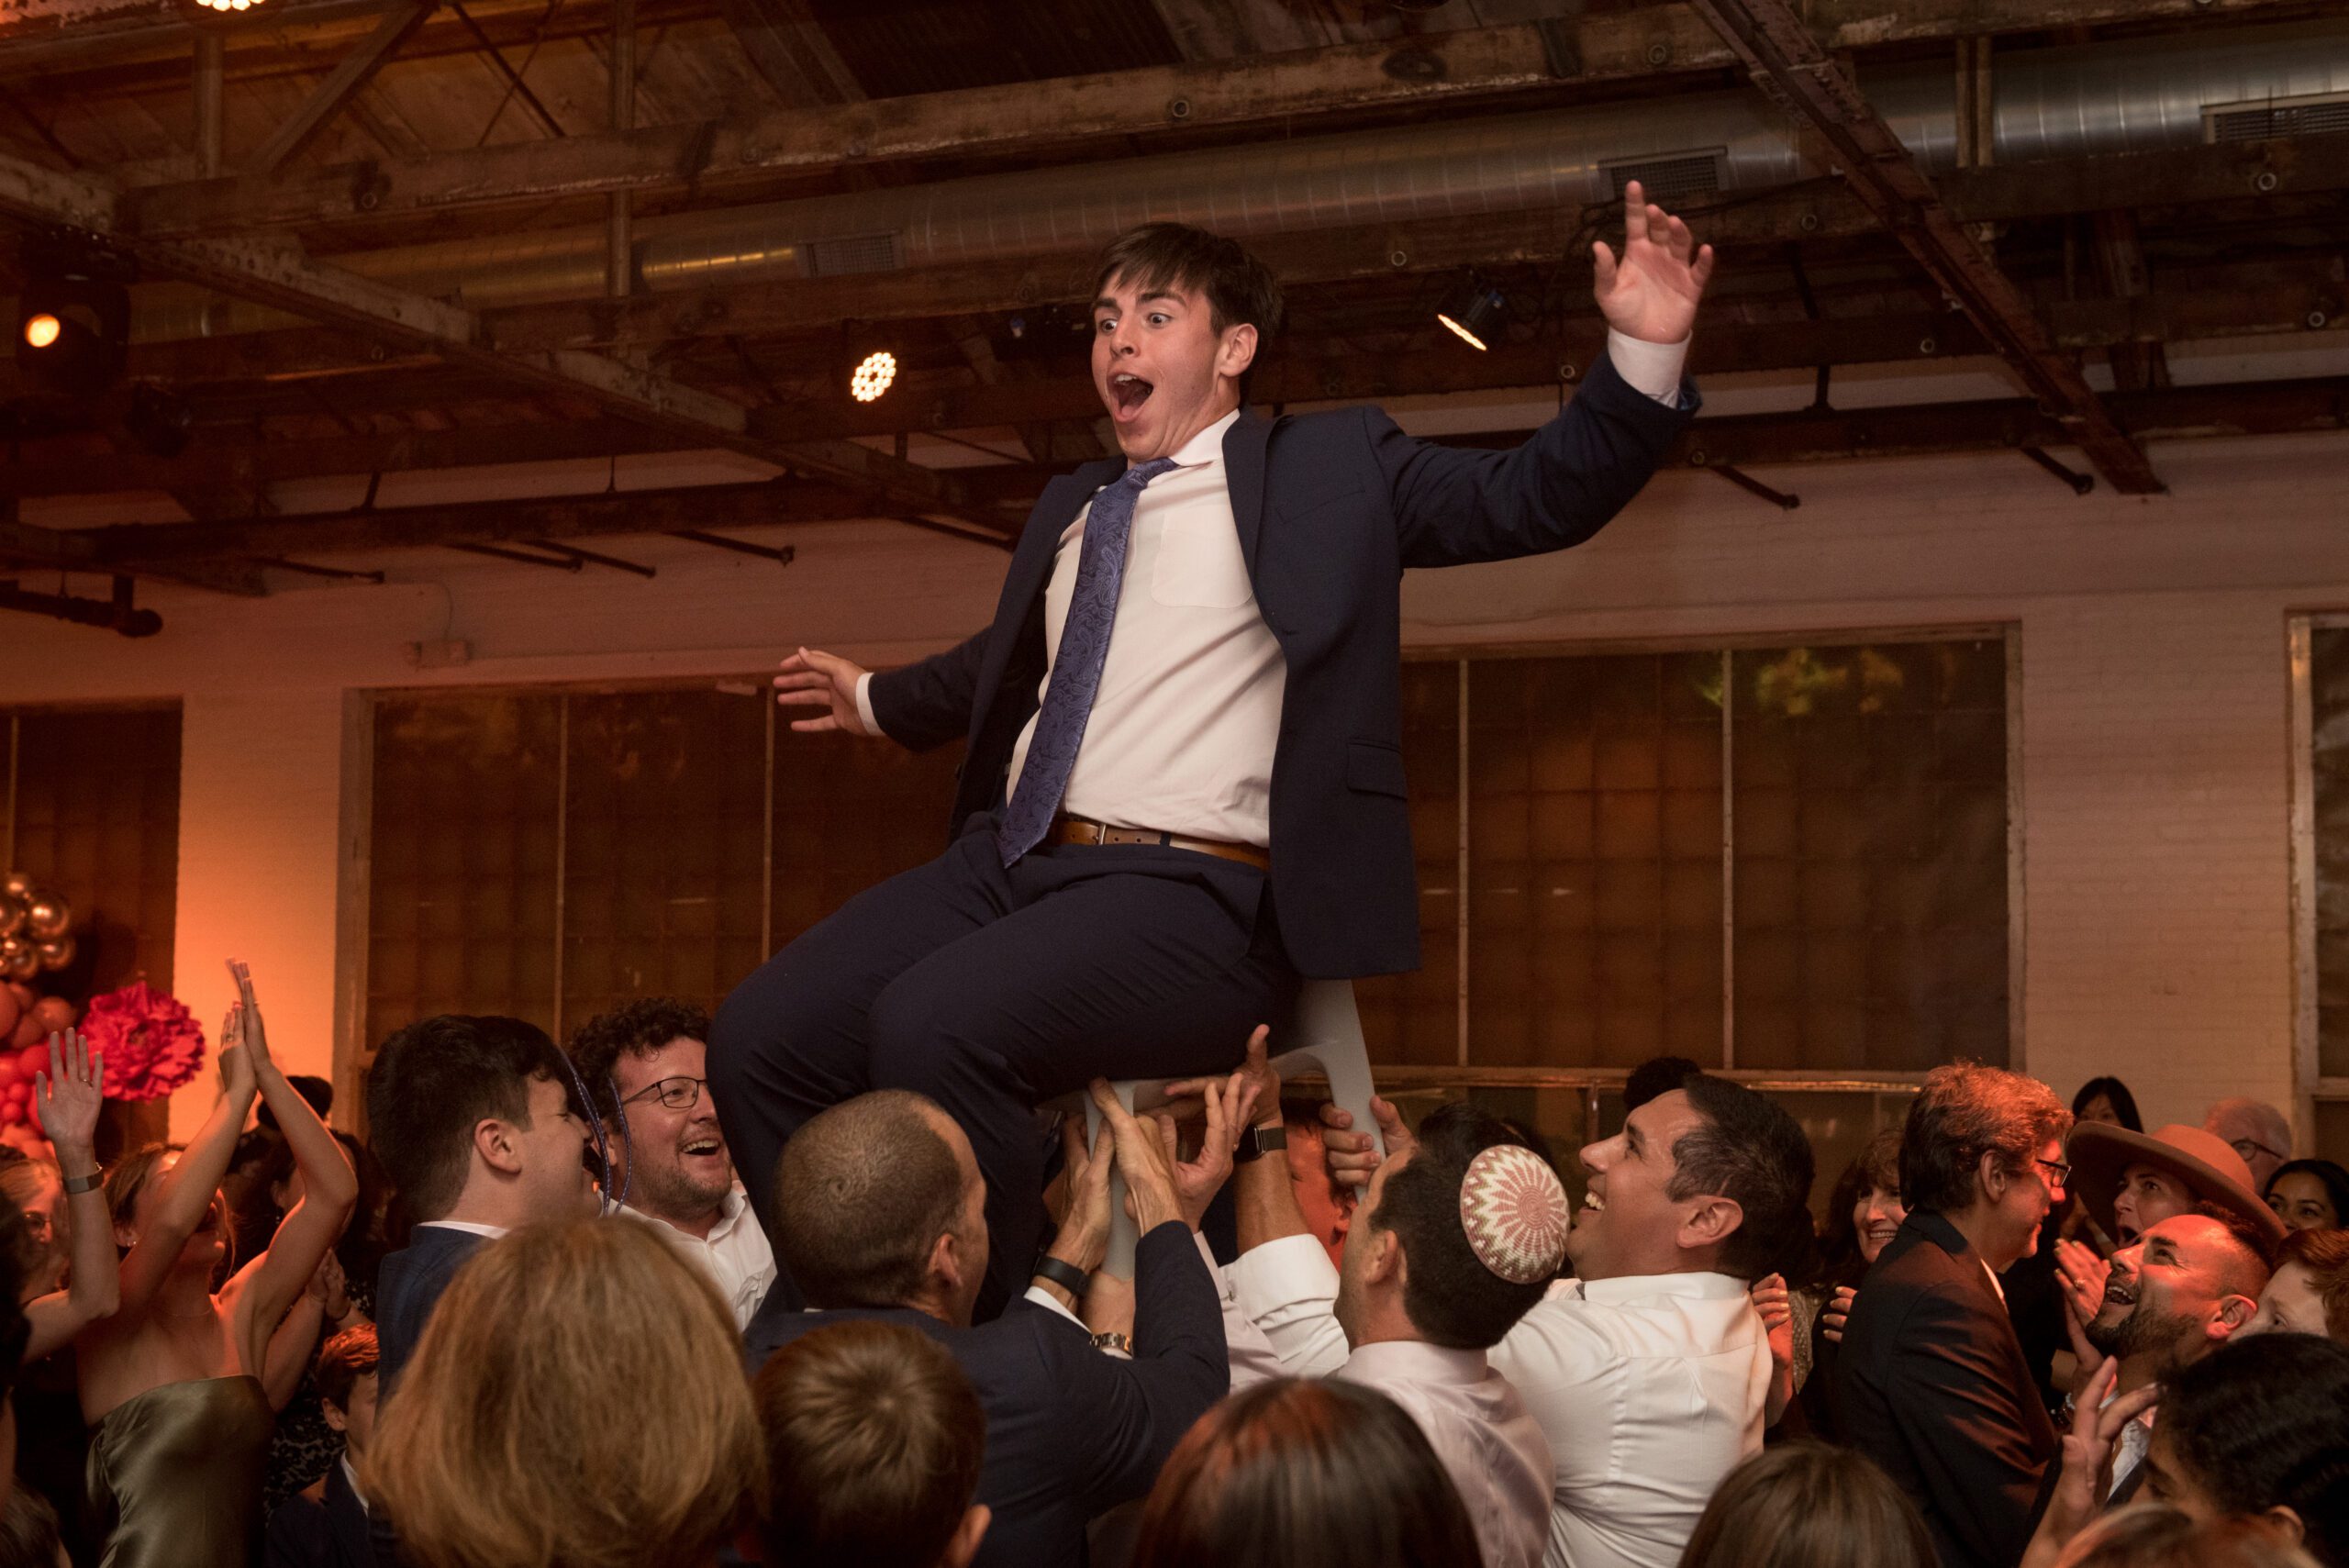 A boy up in the hora chair at a bar mitzvah event